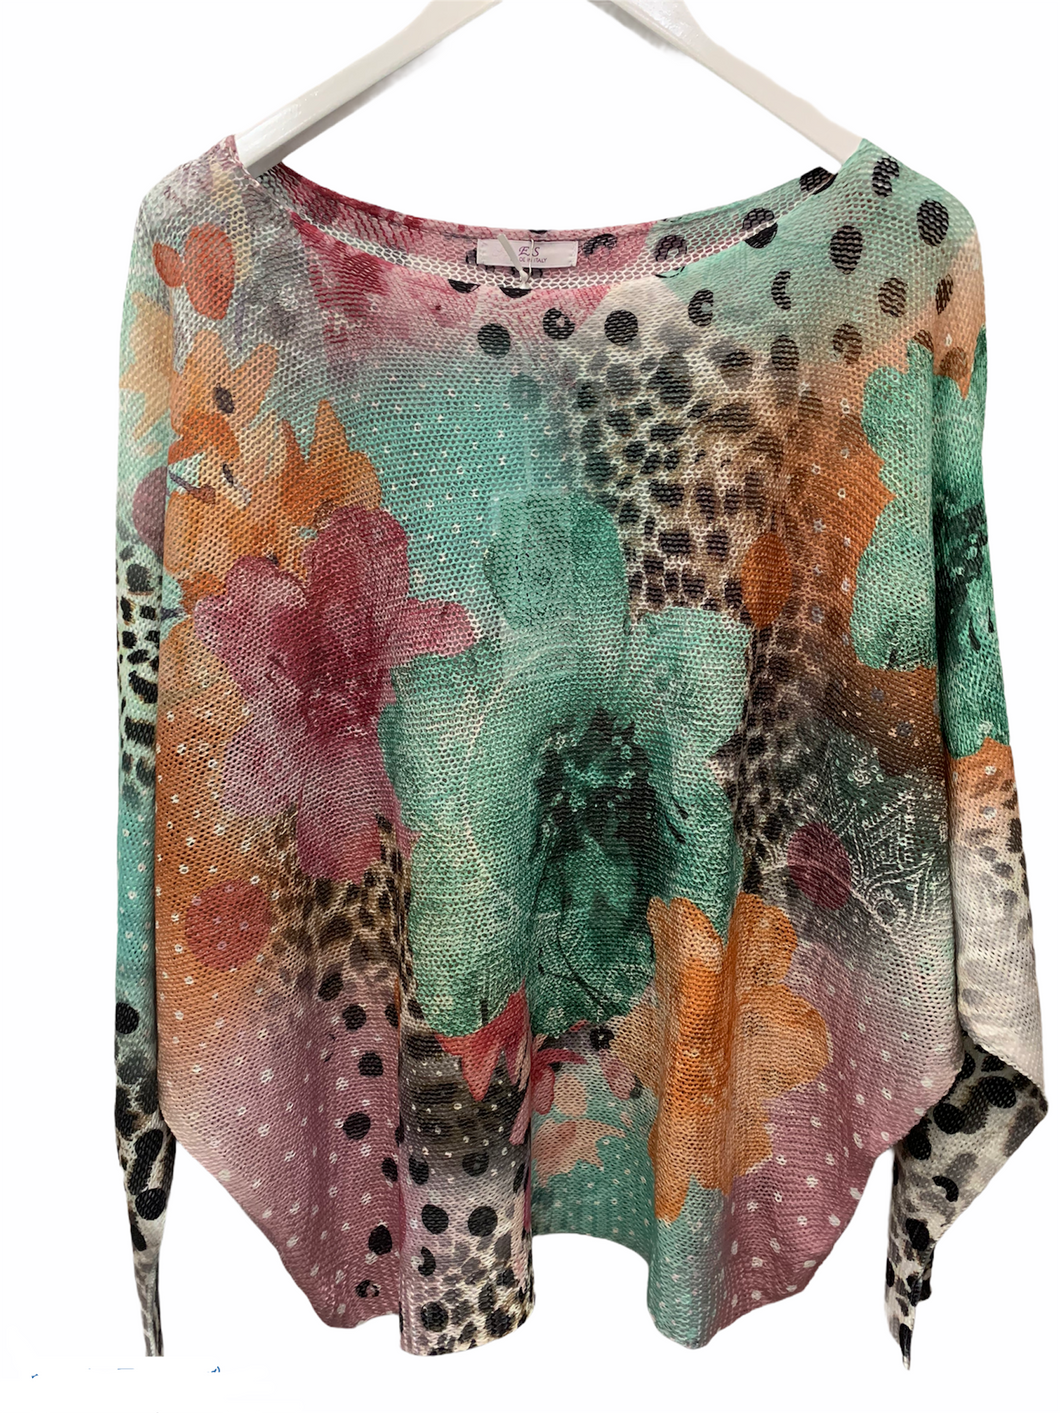 I Water Lilly leopard light weight knit made in Italy